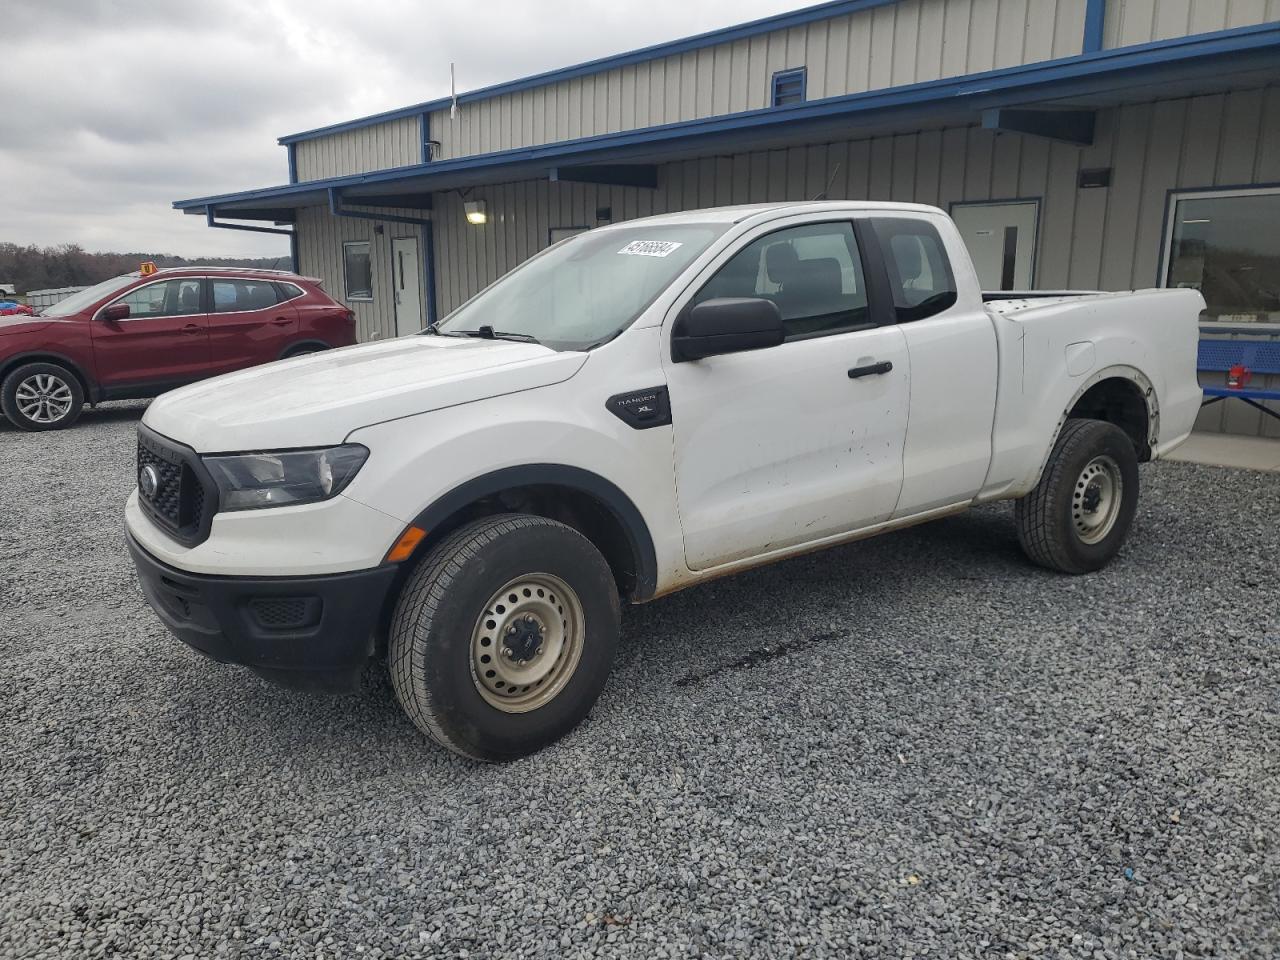 vin: 1FTER1EH8NLD24688 1FTER1EH8NLD24688 2022 ford ranger 2300 for Sale in 28052, Nc - Gastonia, Gastonia, USA